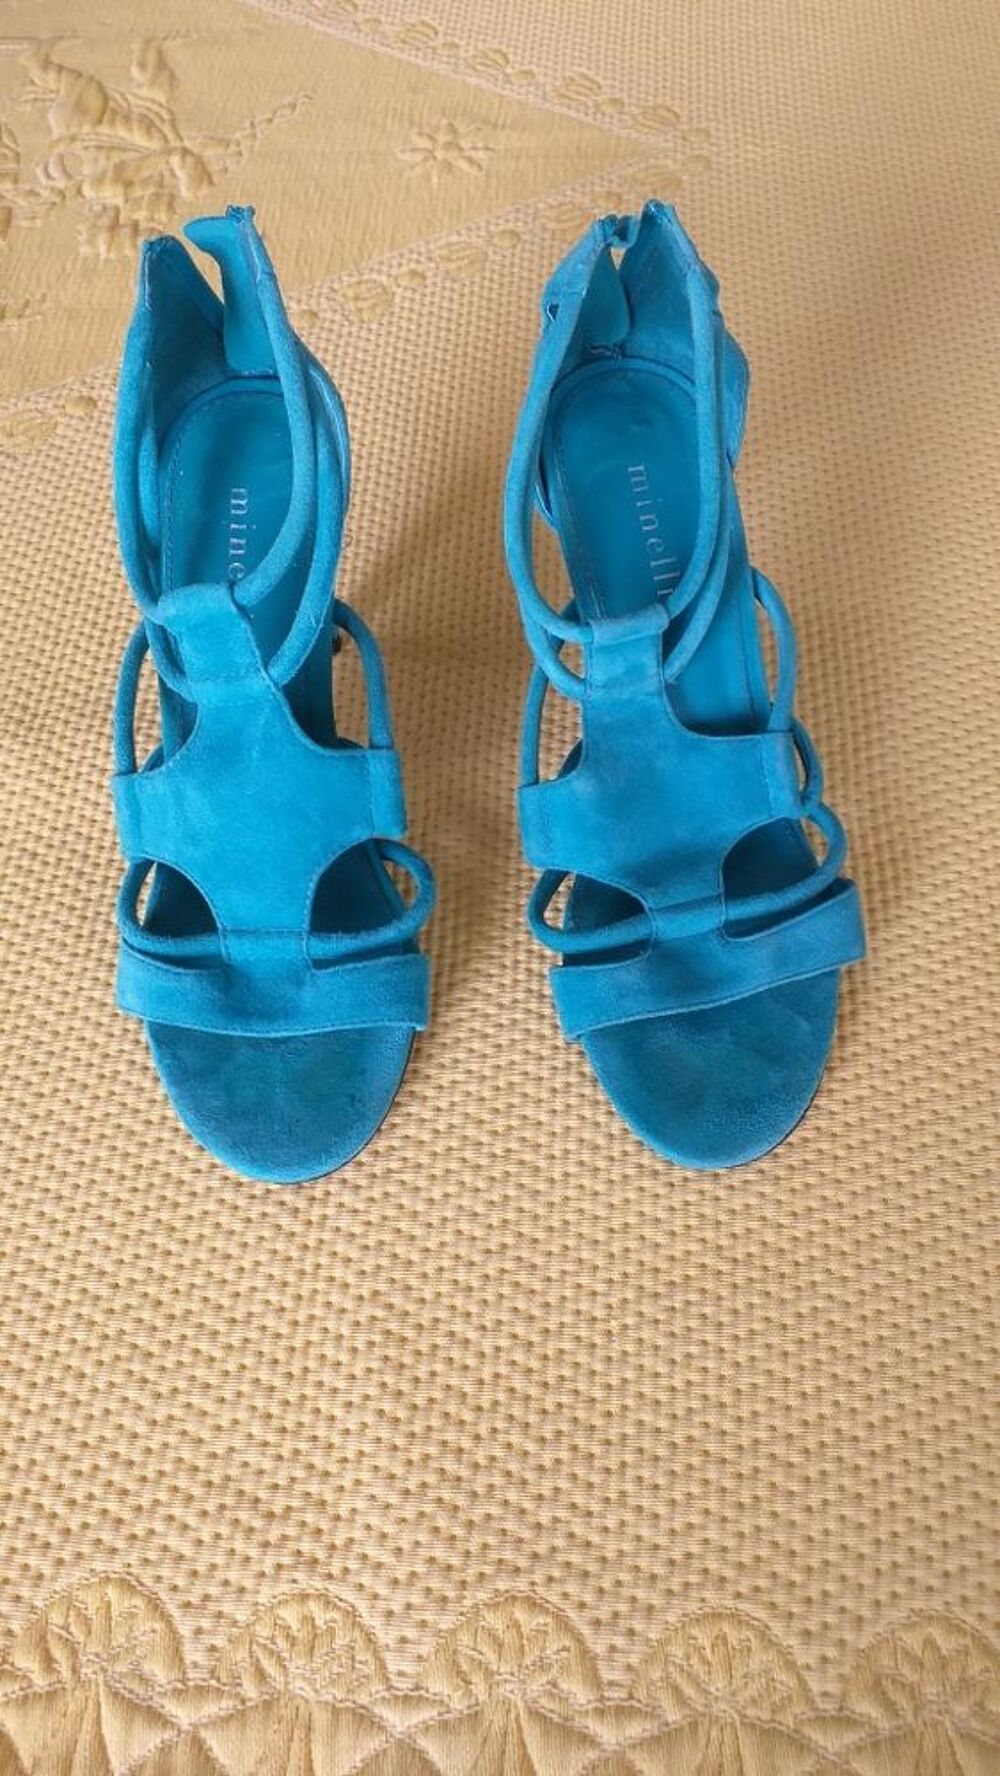 nu pieds turquoises - pointure 38 Chaussures